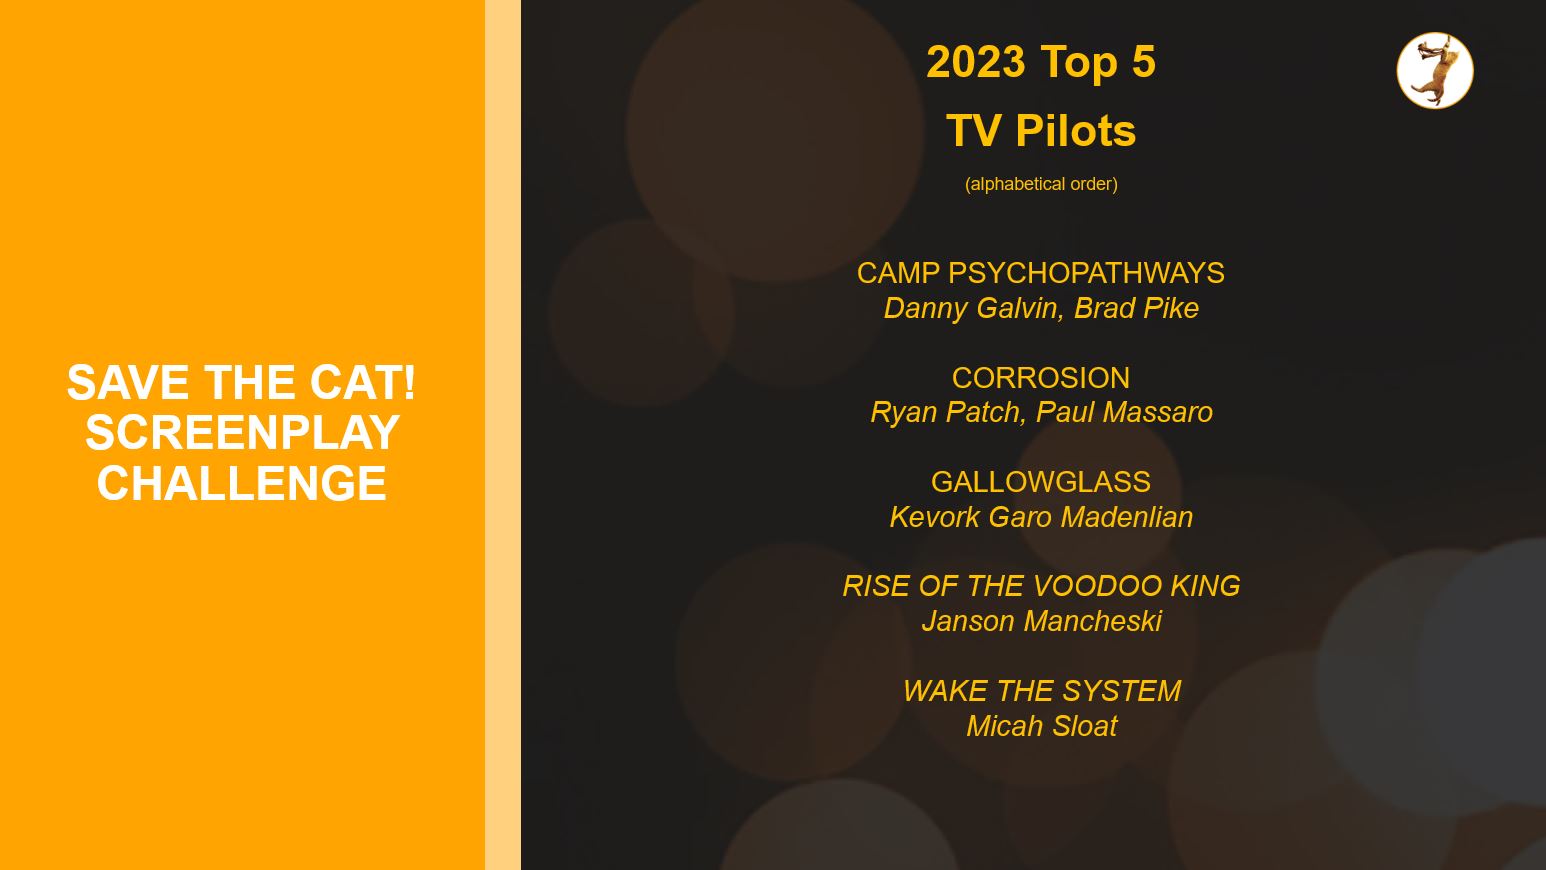 list of Top 5 Finalists for TV Pilots for Save the Cat! Screenplay Challenge 2023